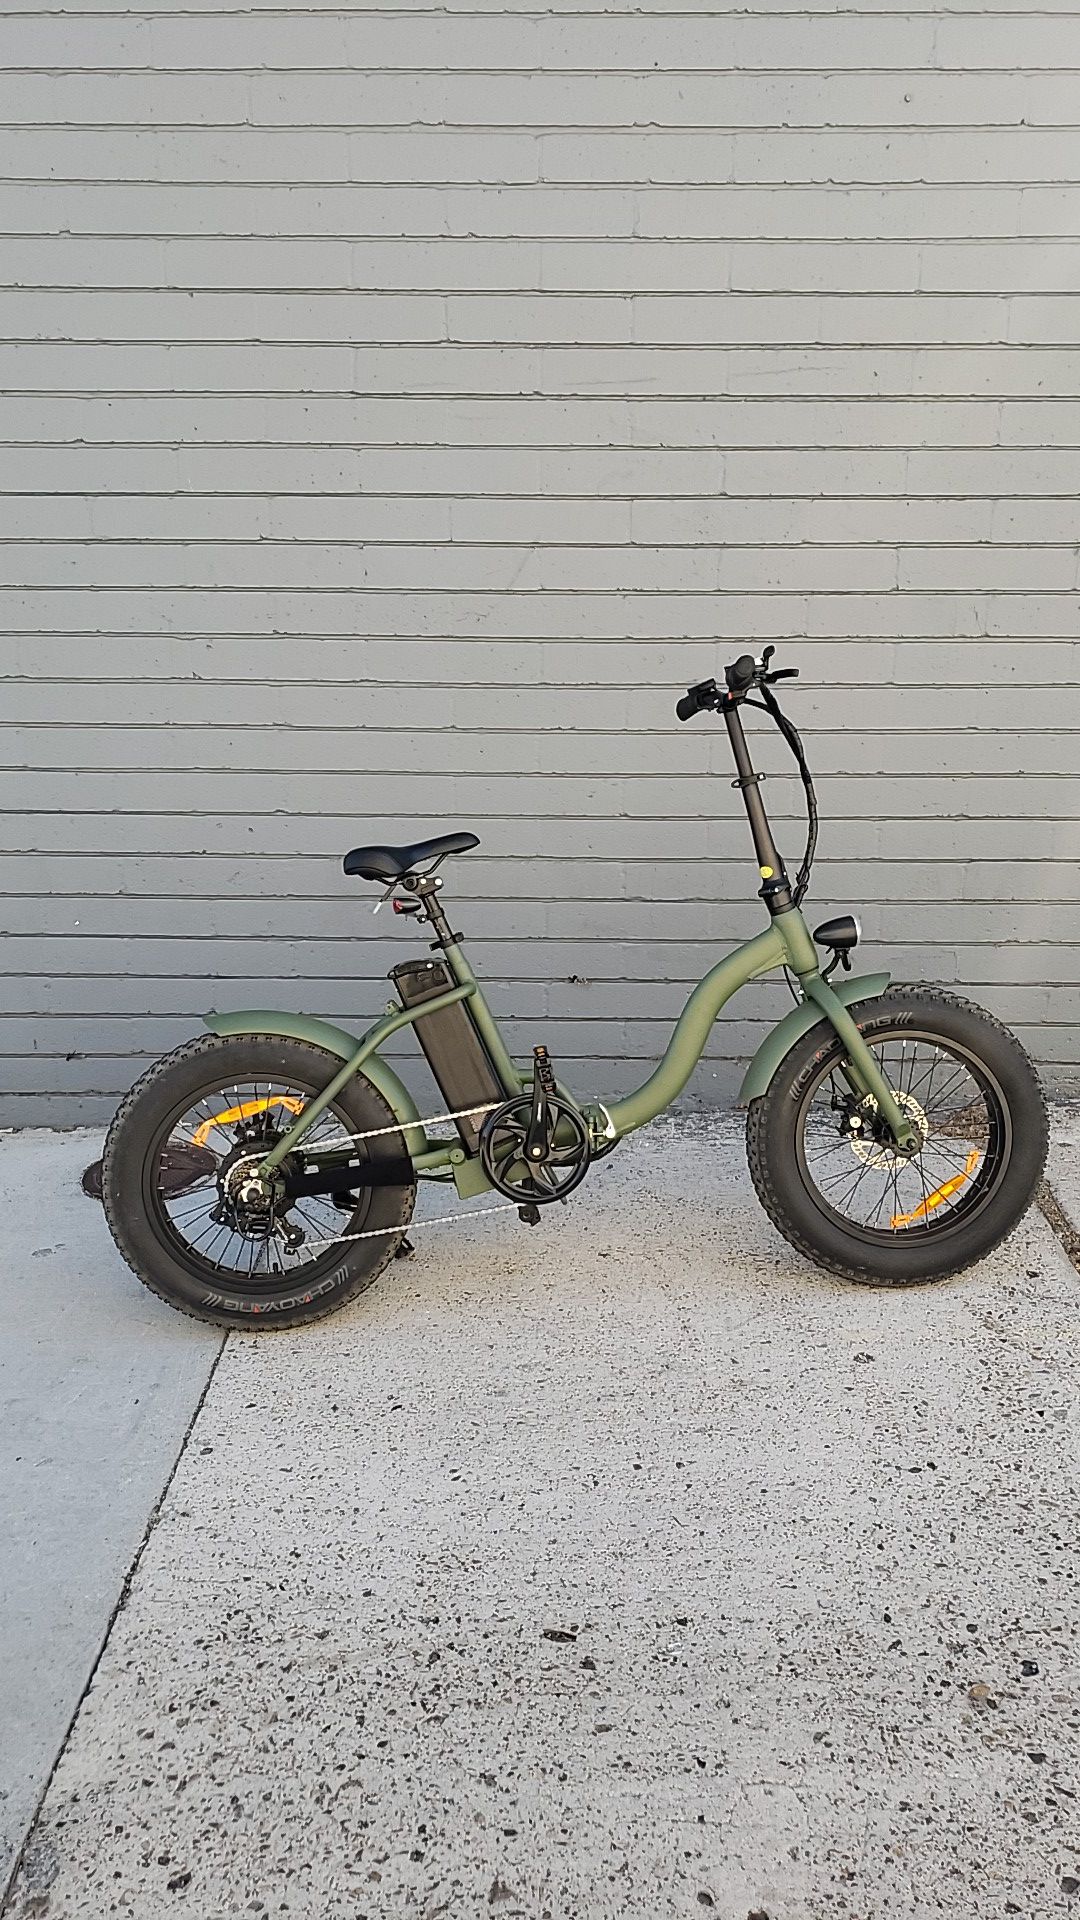 NEW Electric Bicycle 48V 500W "TJC" Moss Chaos